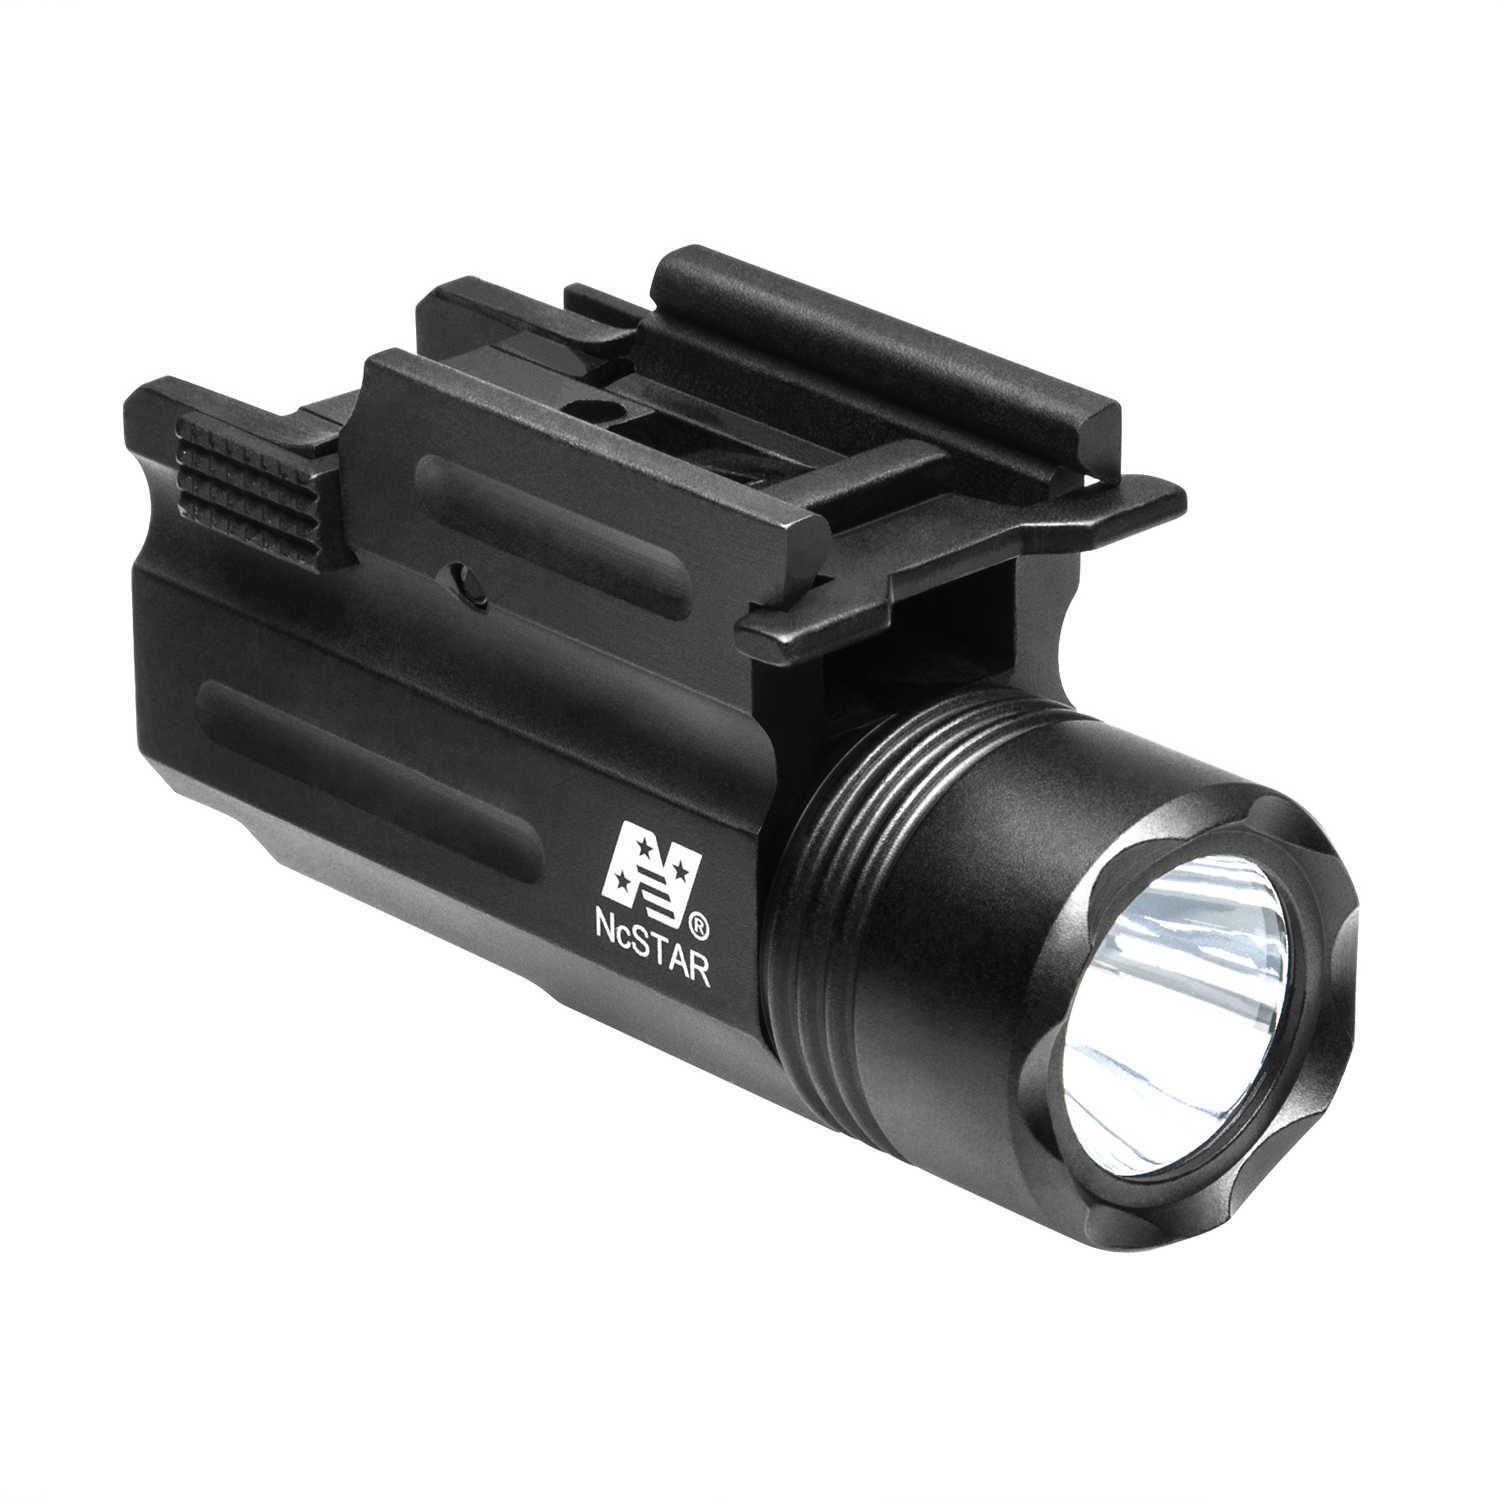 NcStar Green Laser Sight with Flashlight and Quick Release Mount AQPTFLG